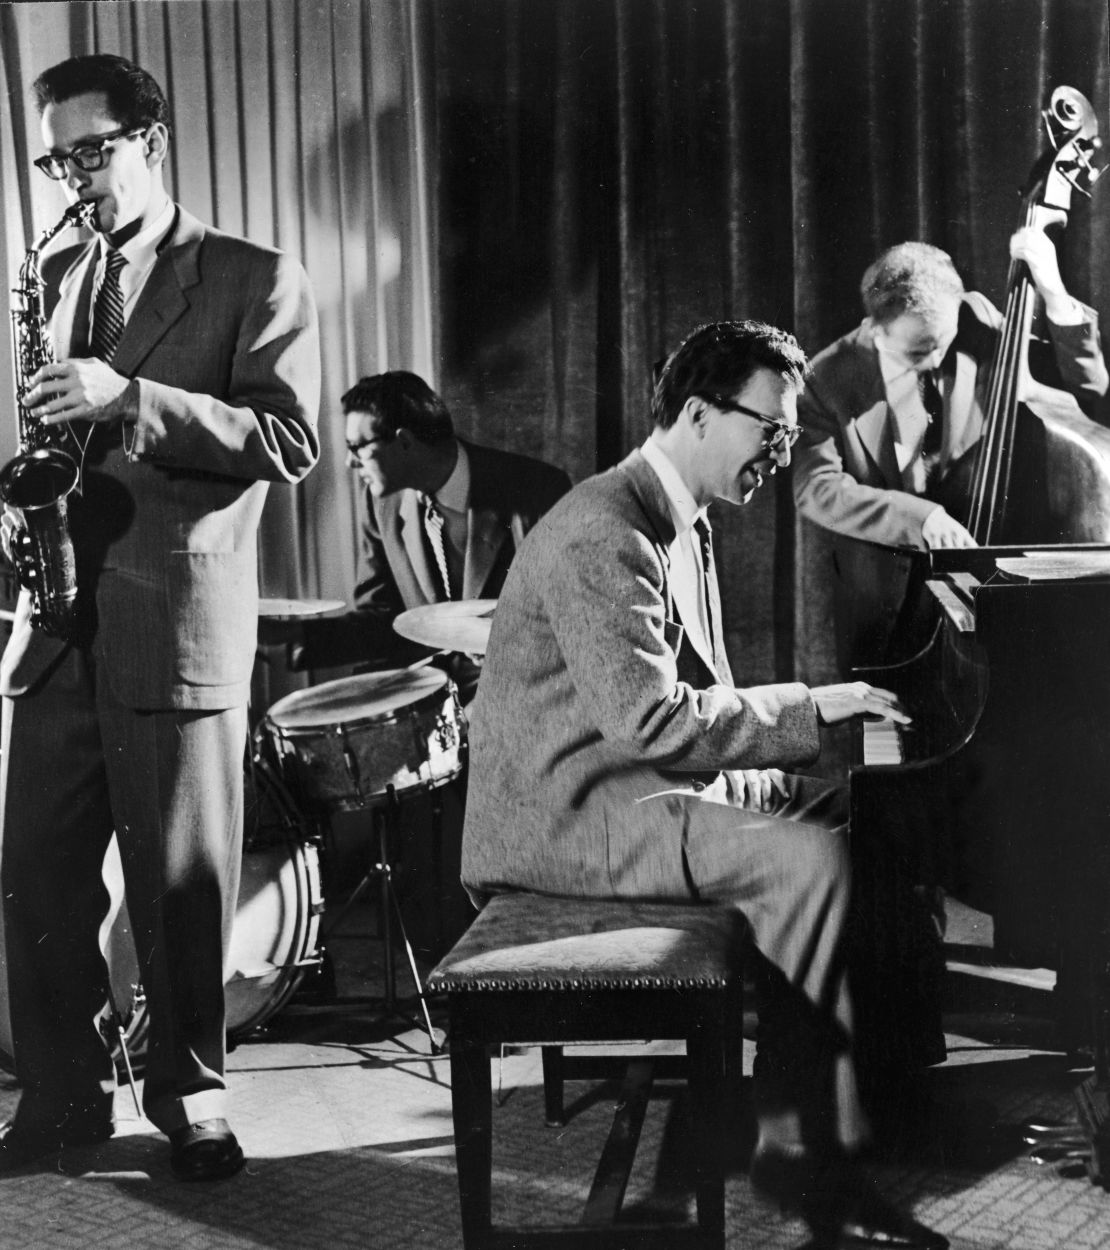  Dave Brubeck capitalized on the differences between musicians in his group to create classic music.